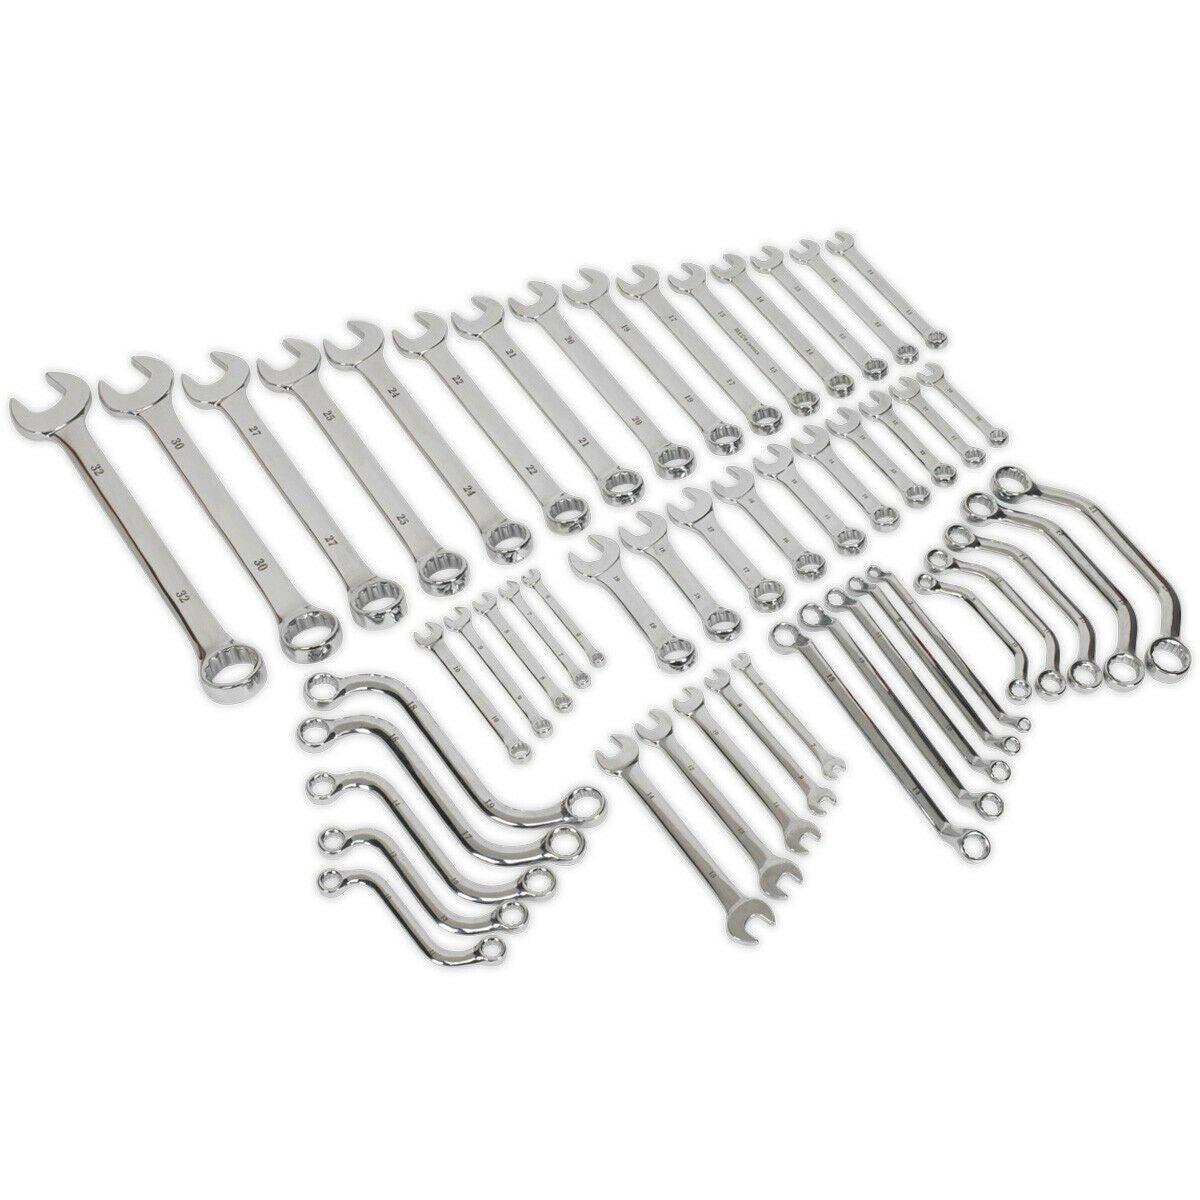 50pc Metric Multi-Purpose Spanner Set - Offset / S / Stubby / Combination / Ring